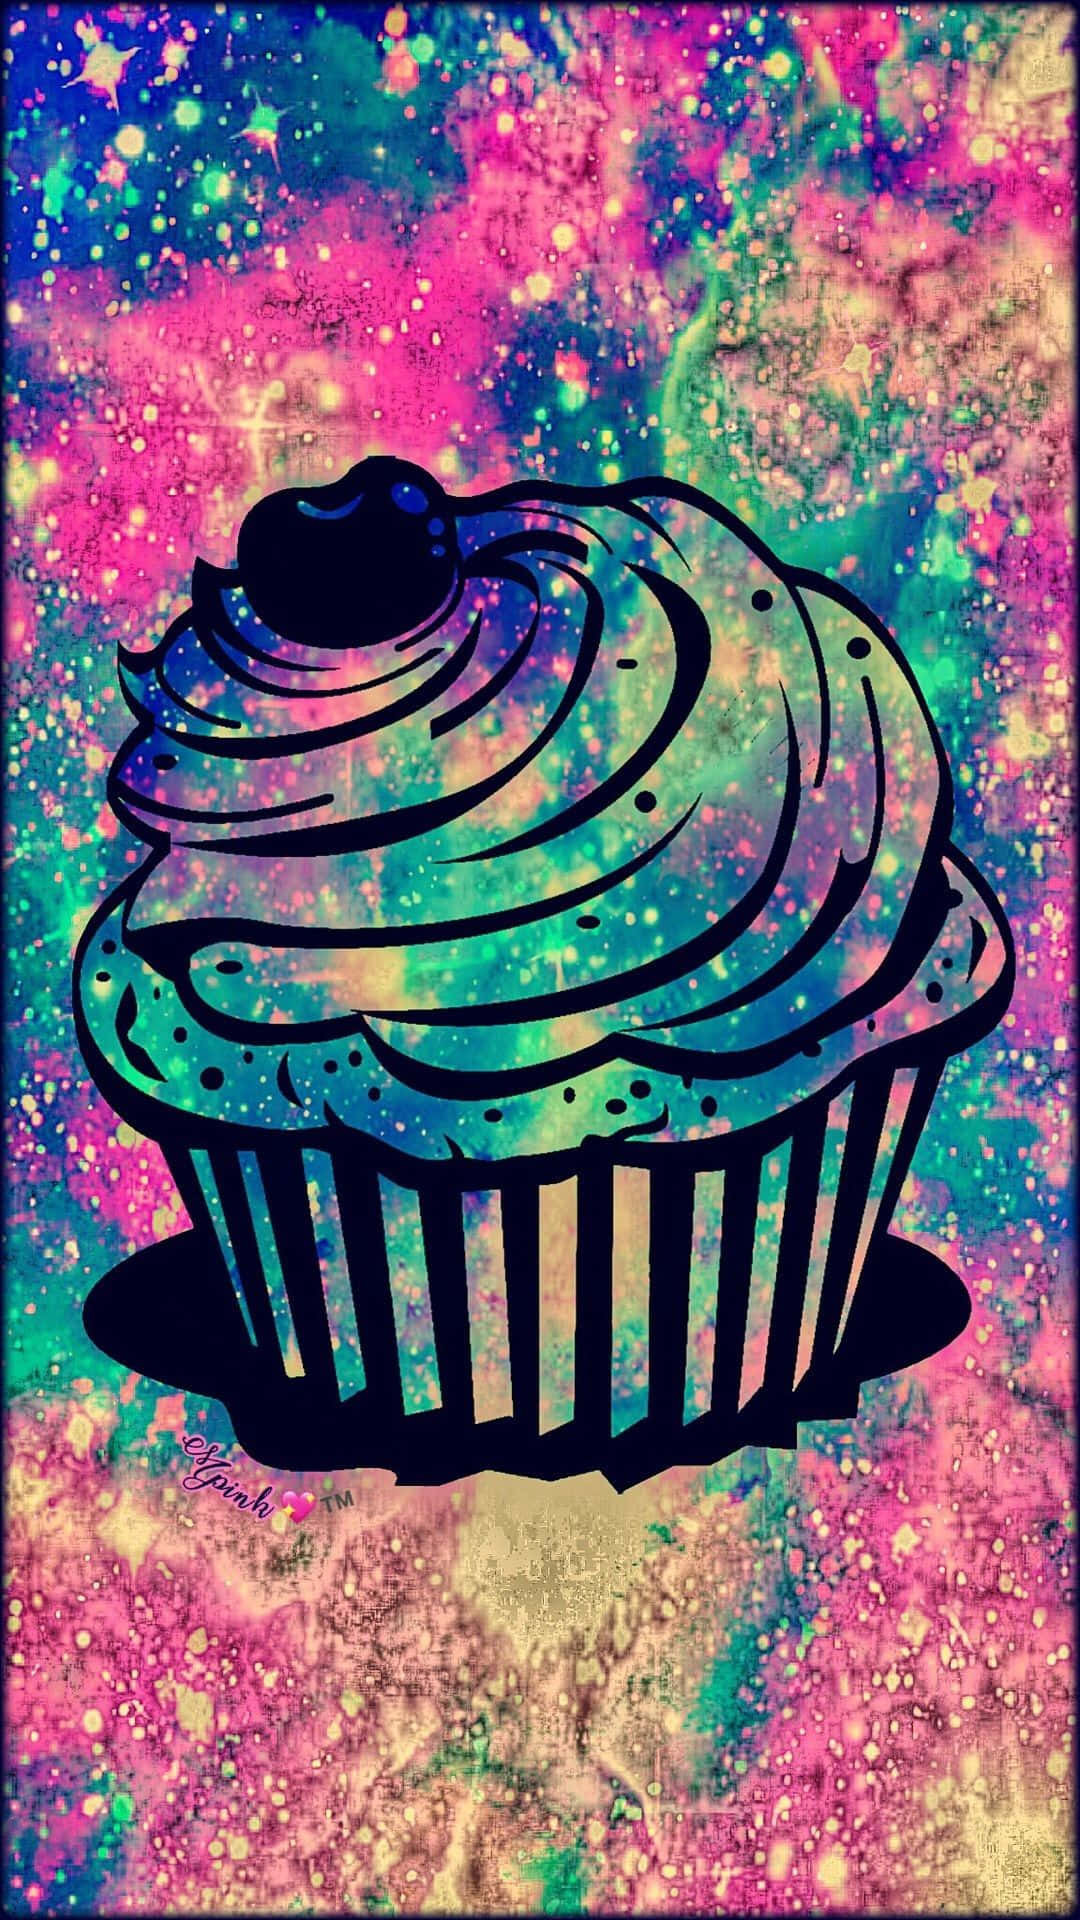 A Cupcake On A Colorful Background Wallpaper